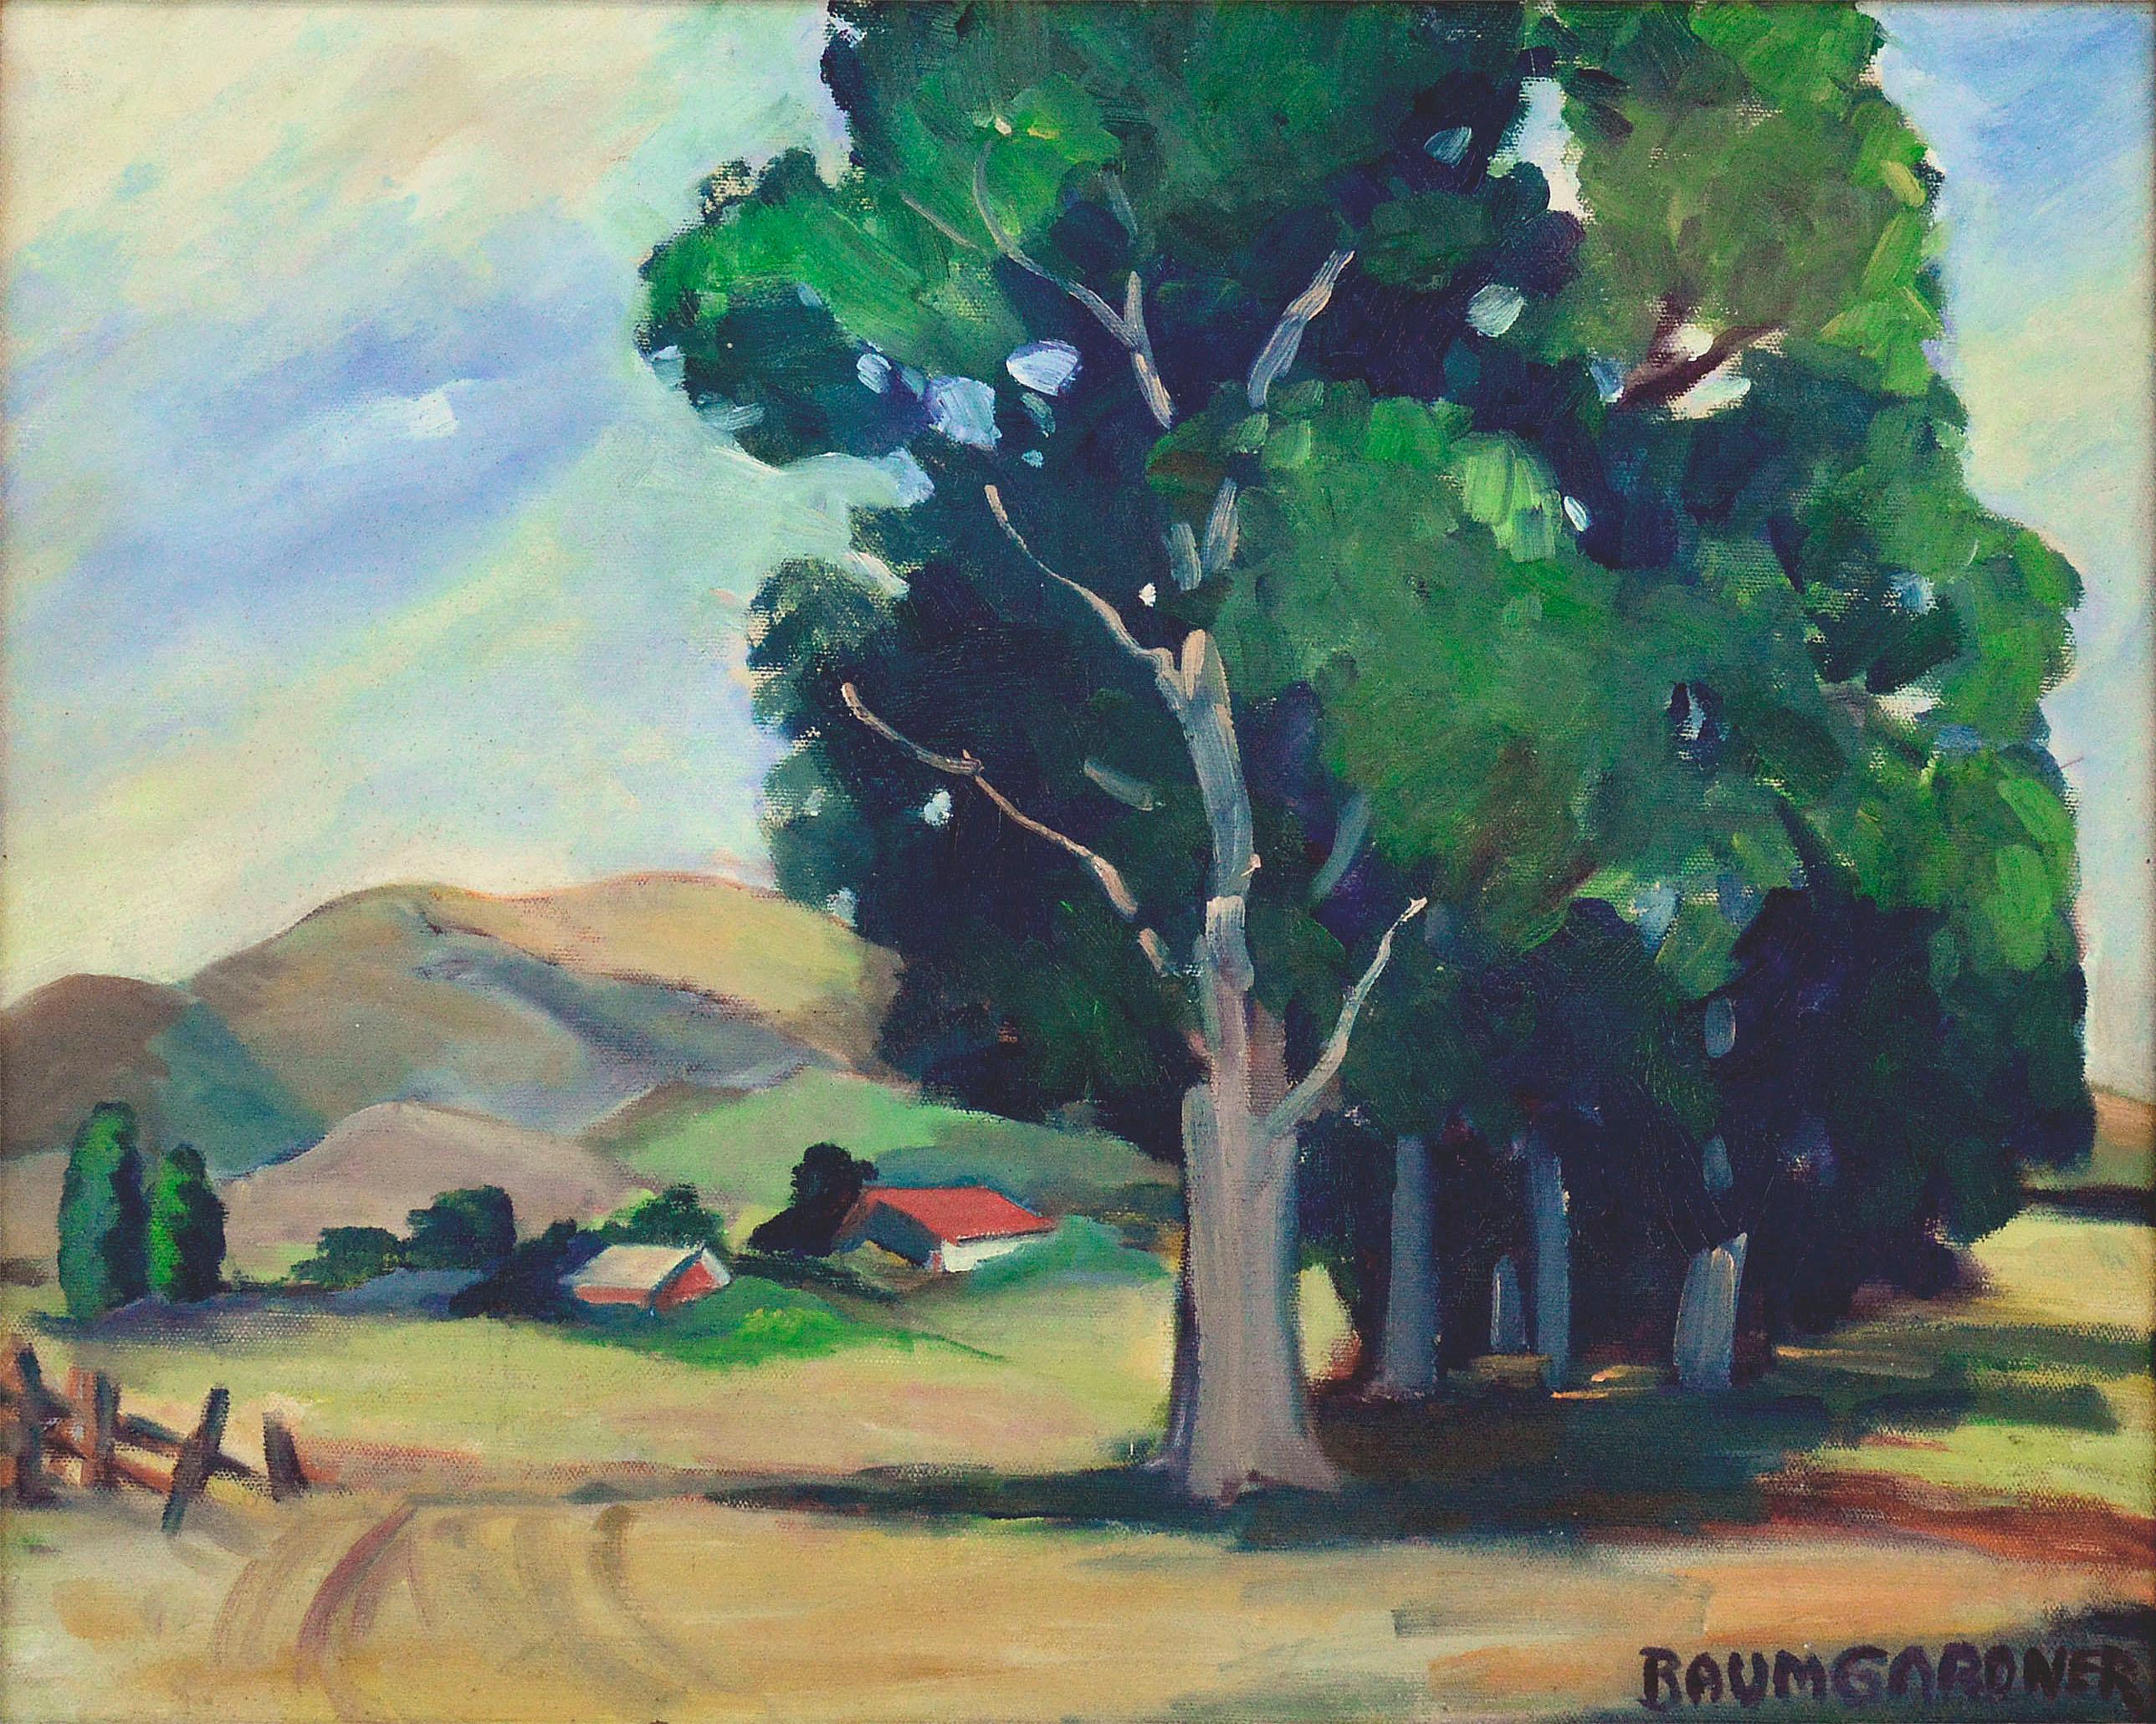 Farm in the Valley - Plein Air California Landscape - Painting by Baumgardner